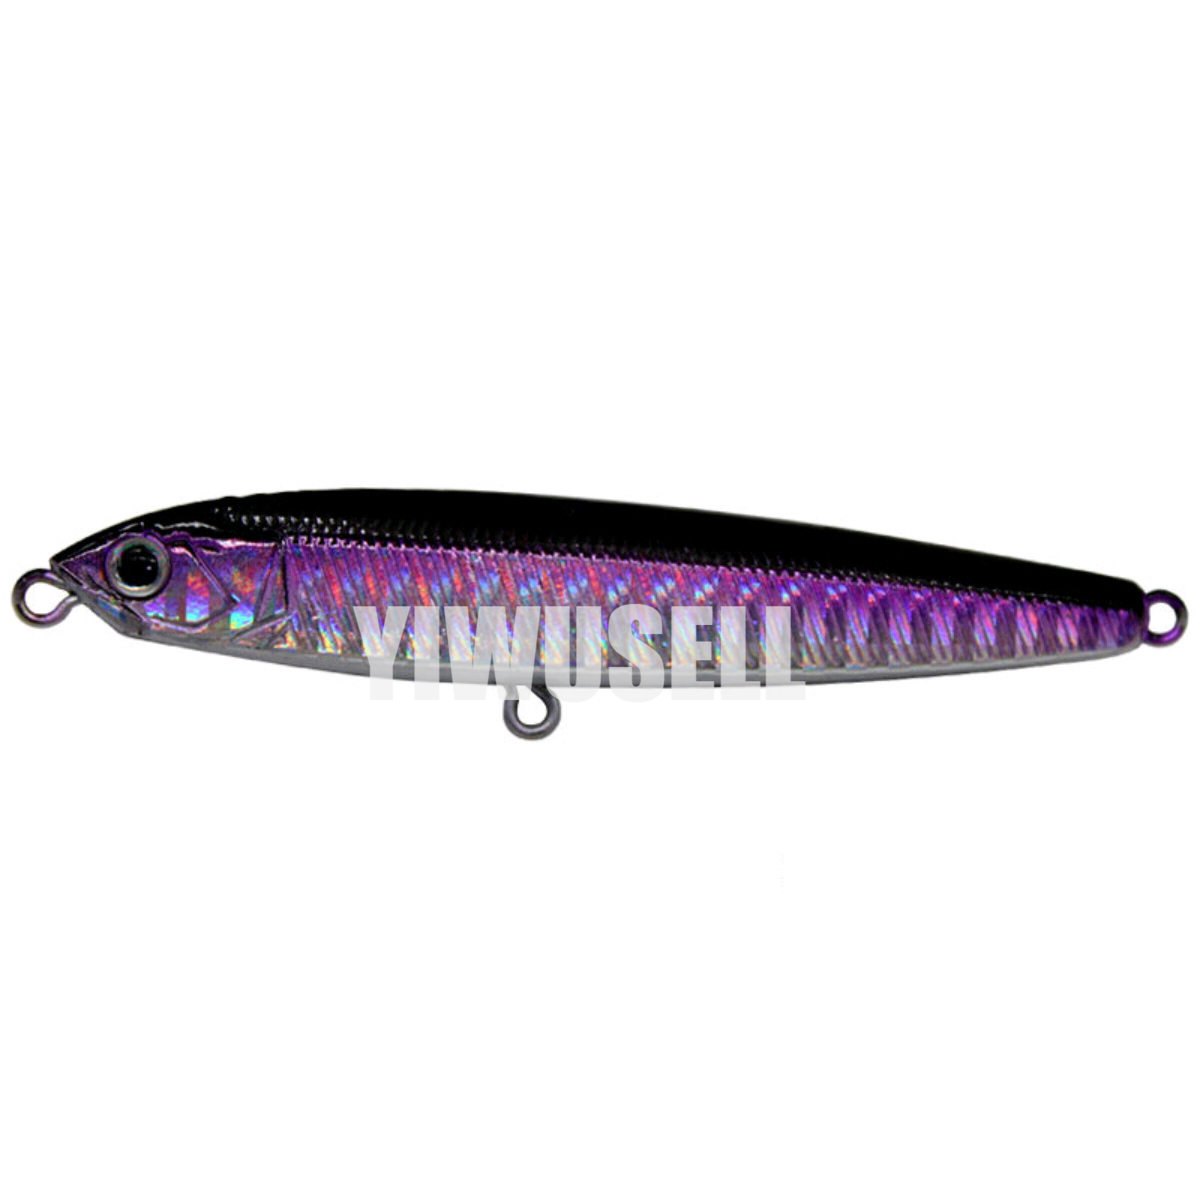 Best Fishing Lures for sale -  YIWUSELL|HOME|KITCHEN|PET|CAMPING|STATIONERY|TOOLS|CLEAN